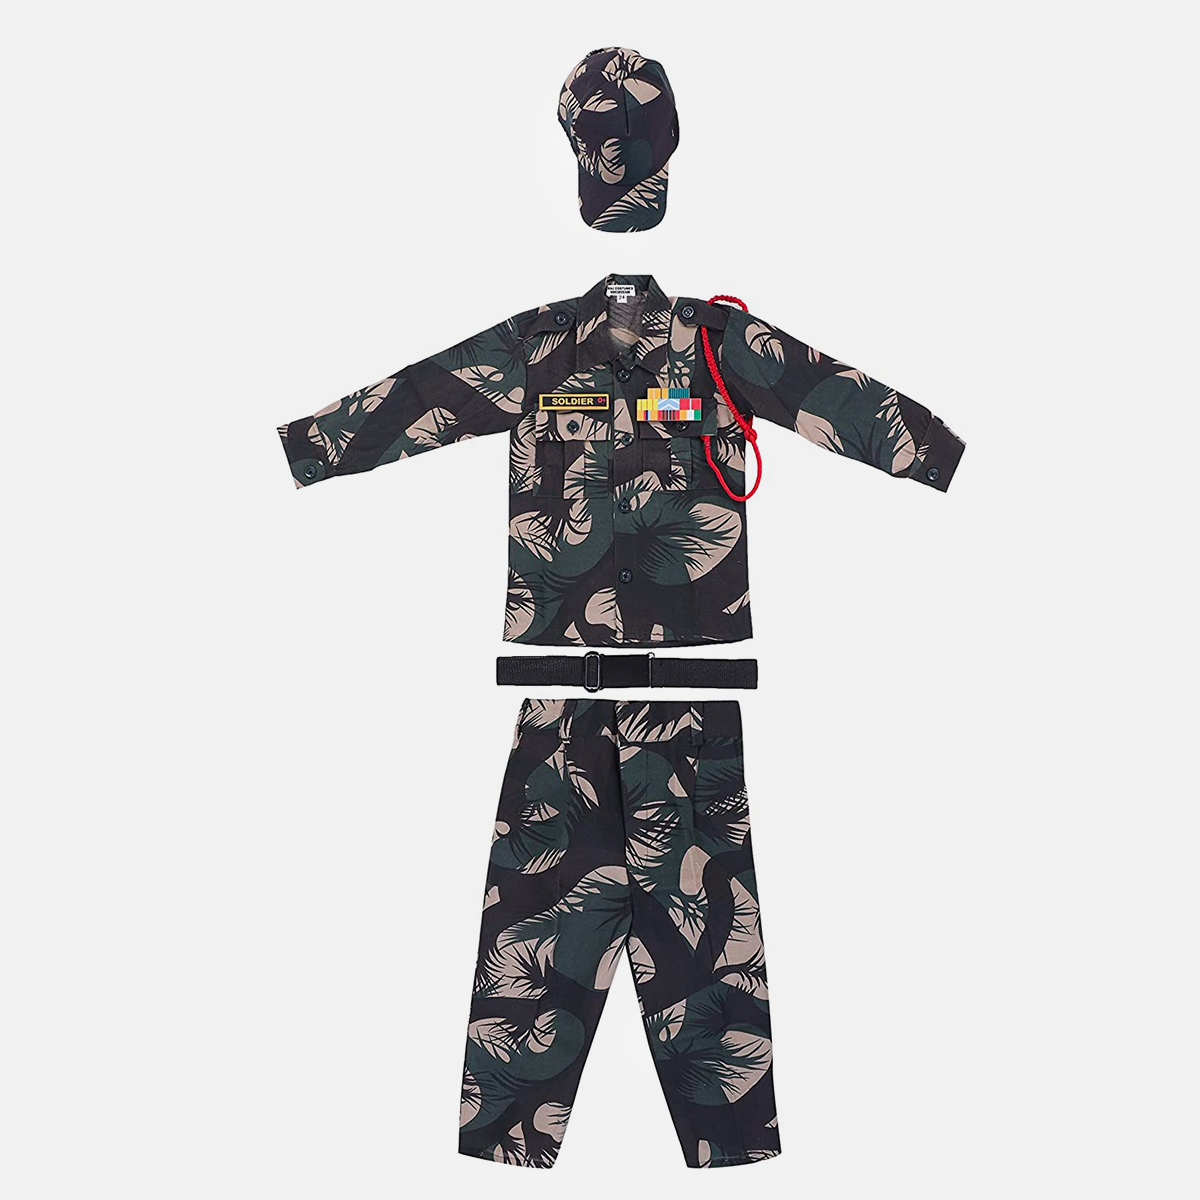 Army Dress for Kids, Polyester Fabric with Jungle Print for Patriotic Cosplay, 7Pc Set with Cap